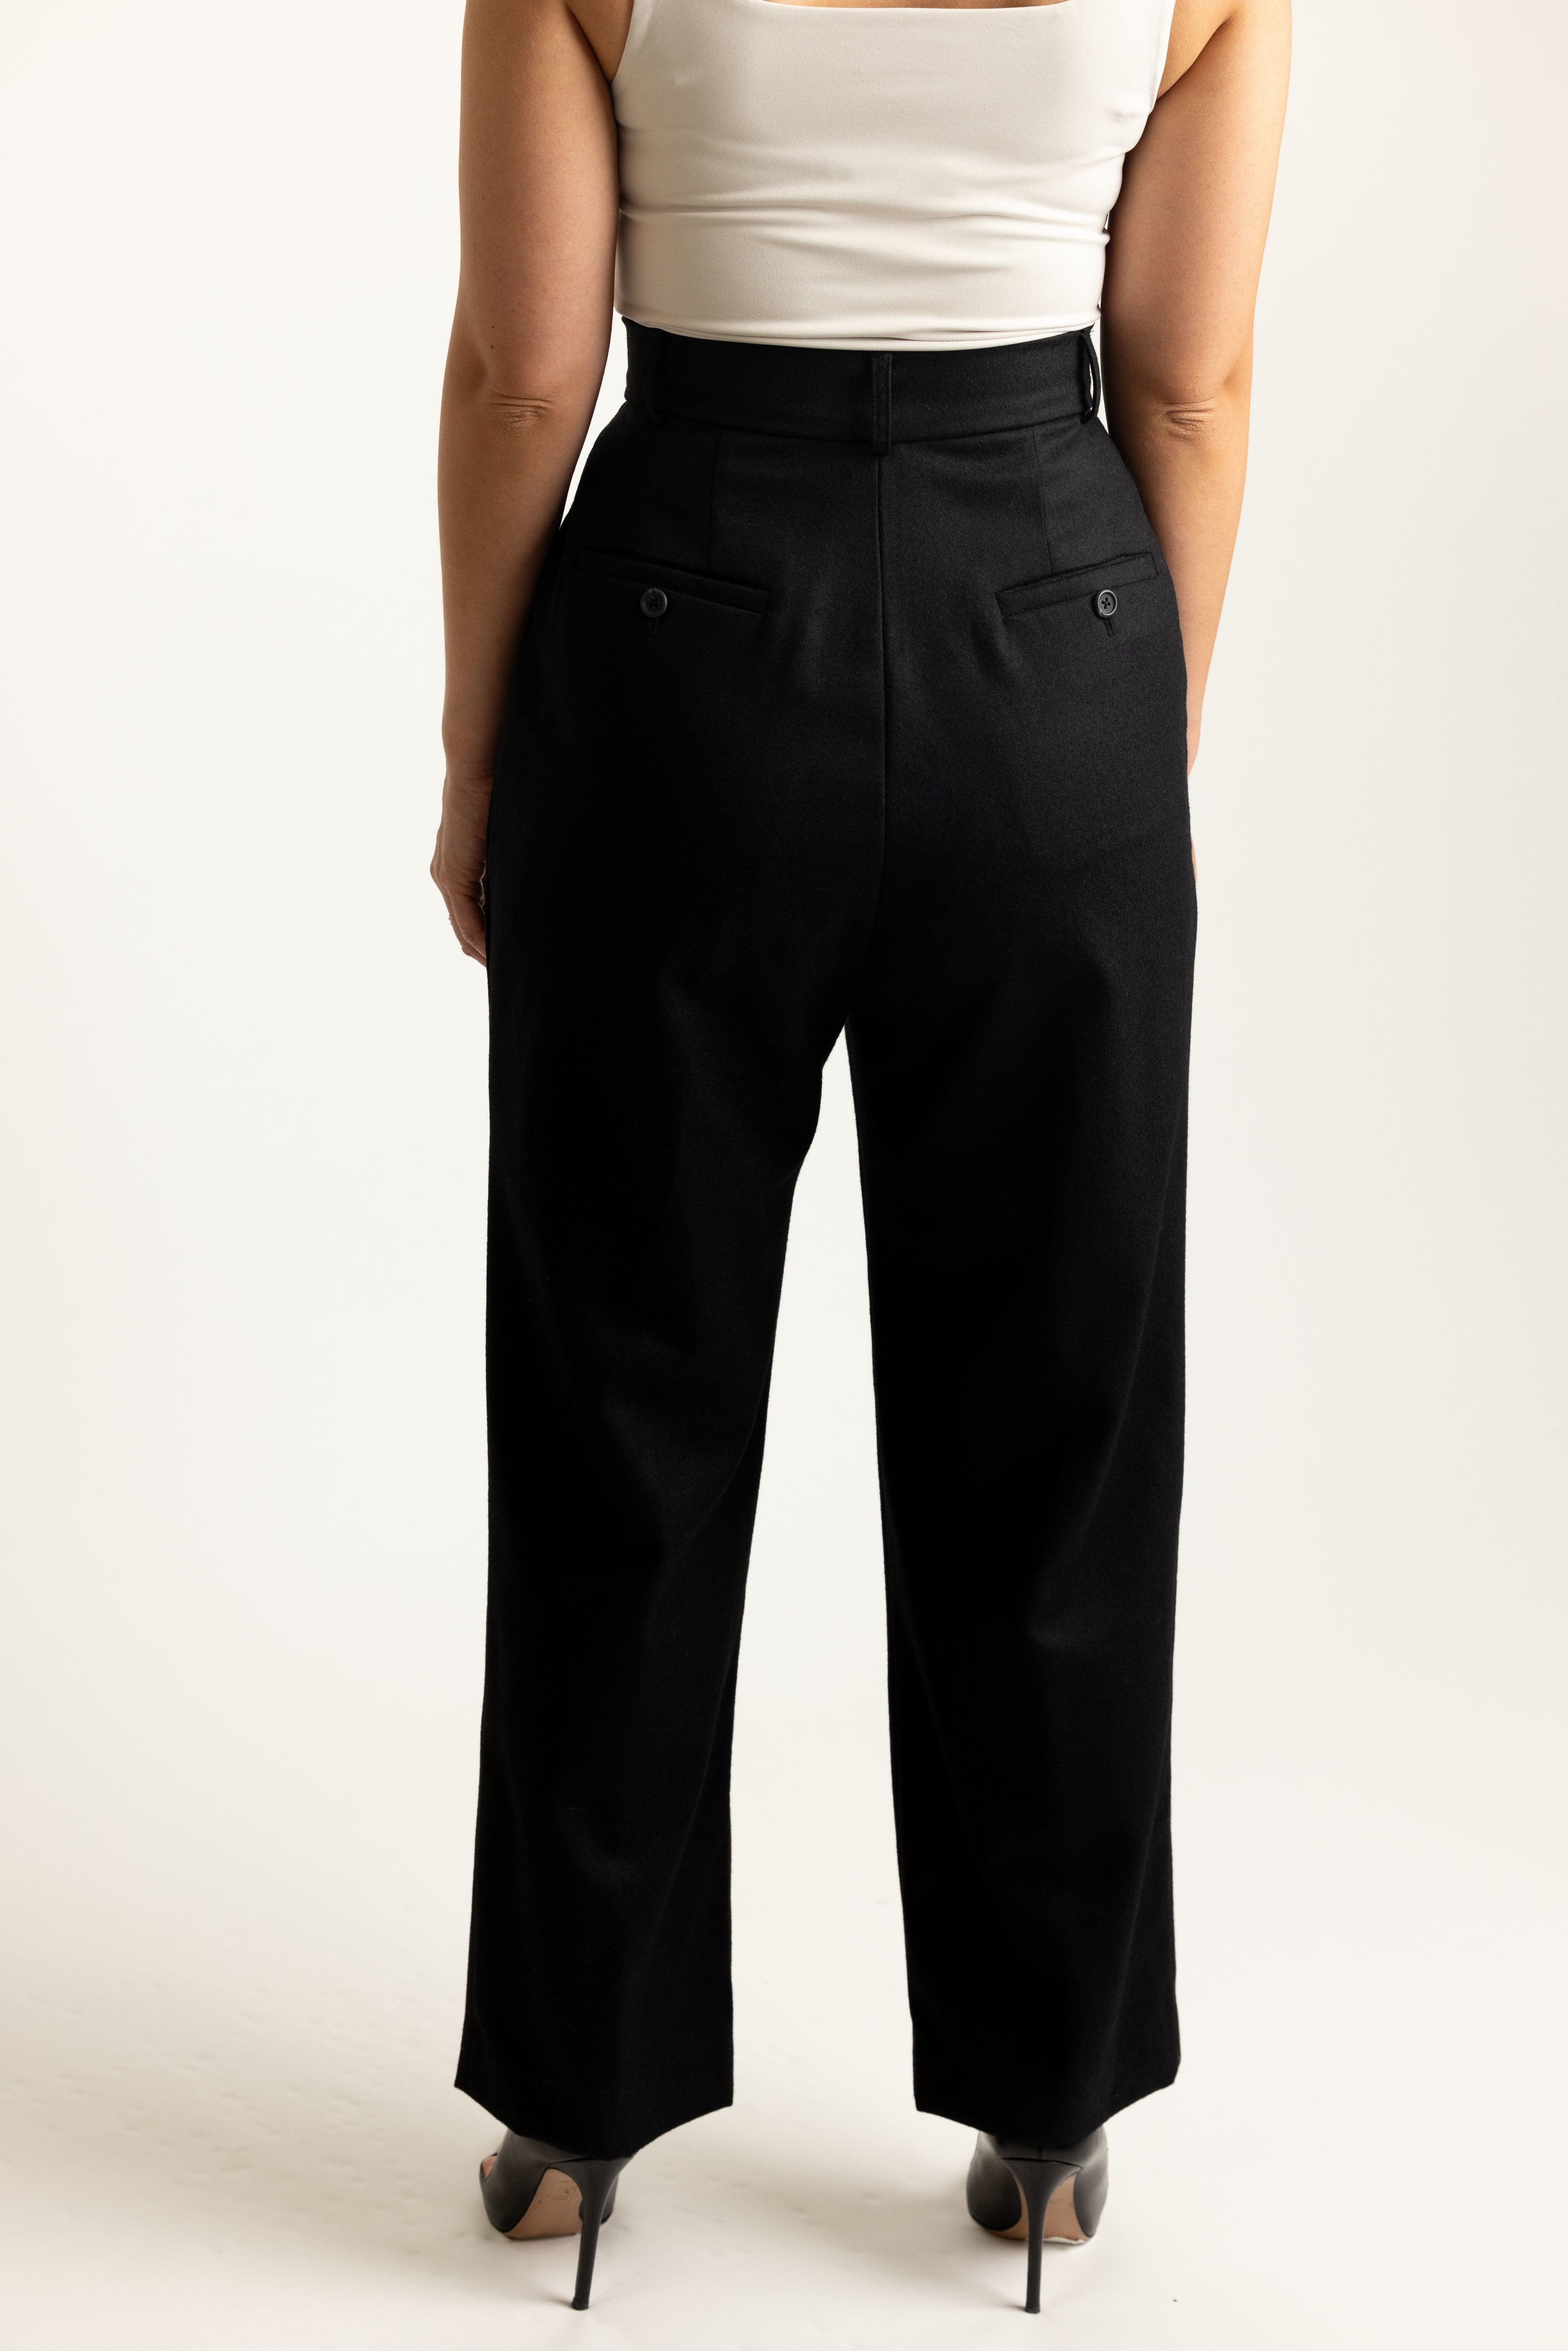 Trial Trouser in Black - back view